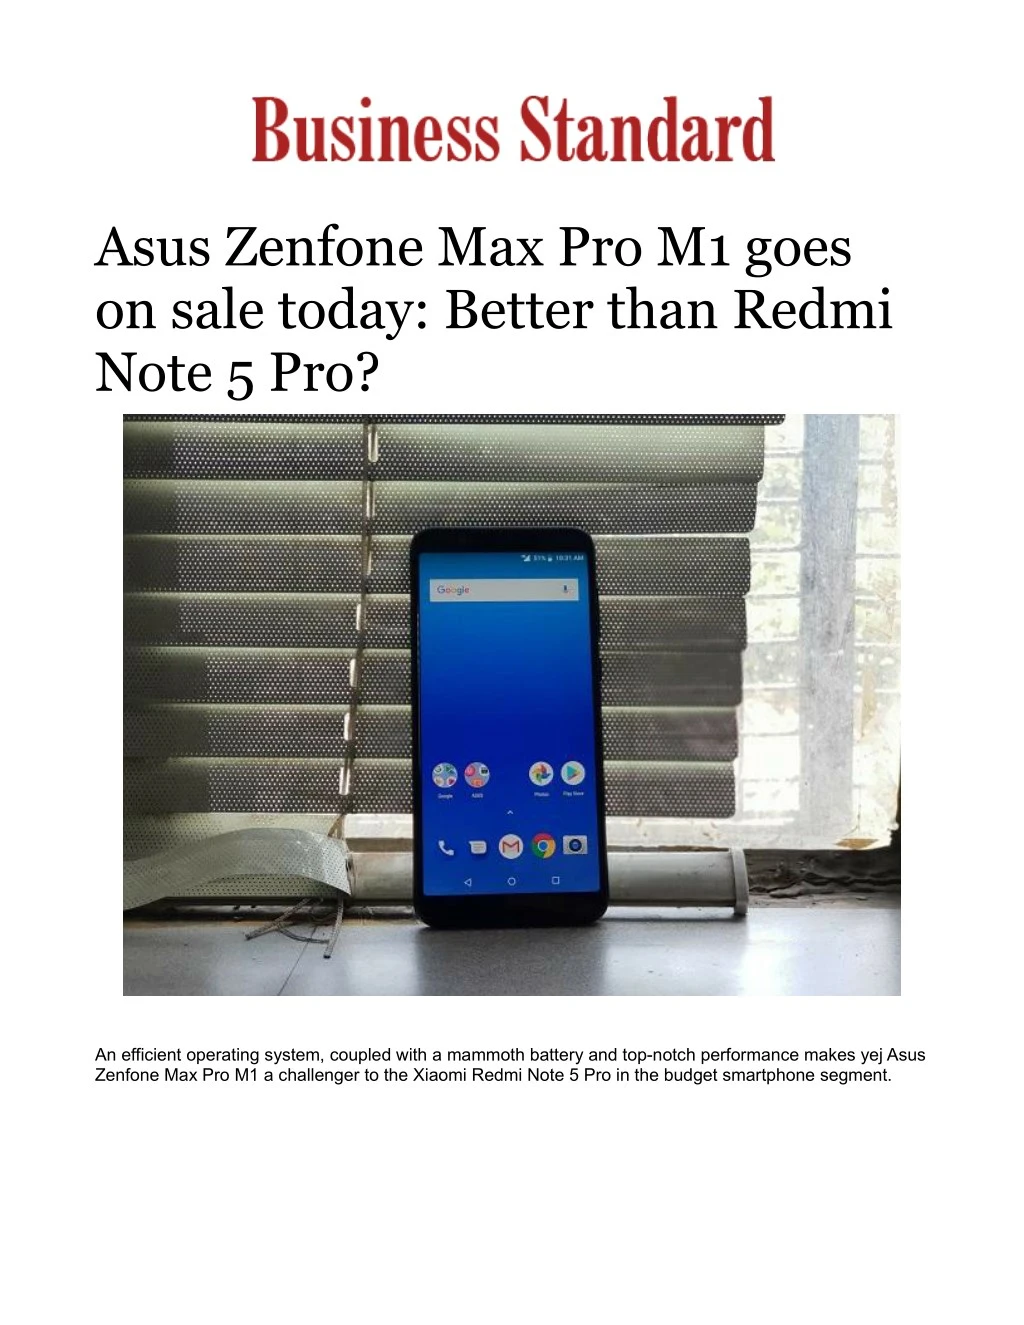 asus zenfone max pro m1 goes on sale today better